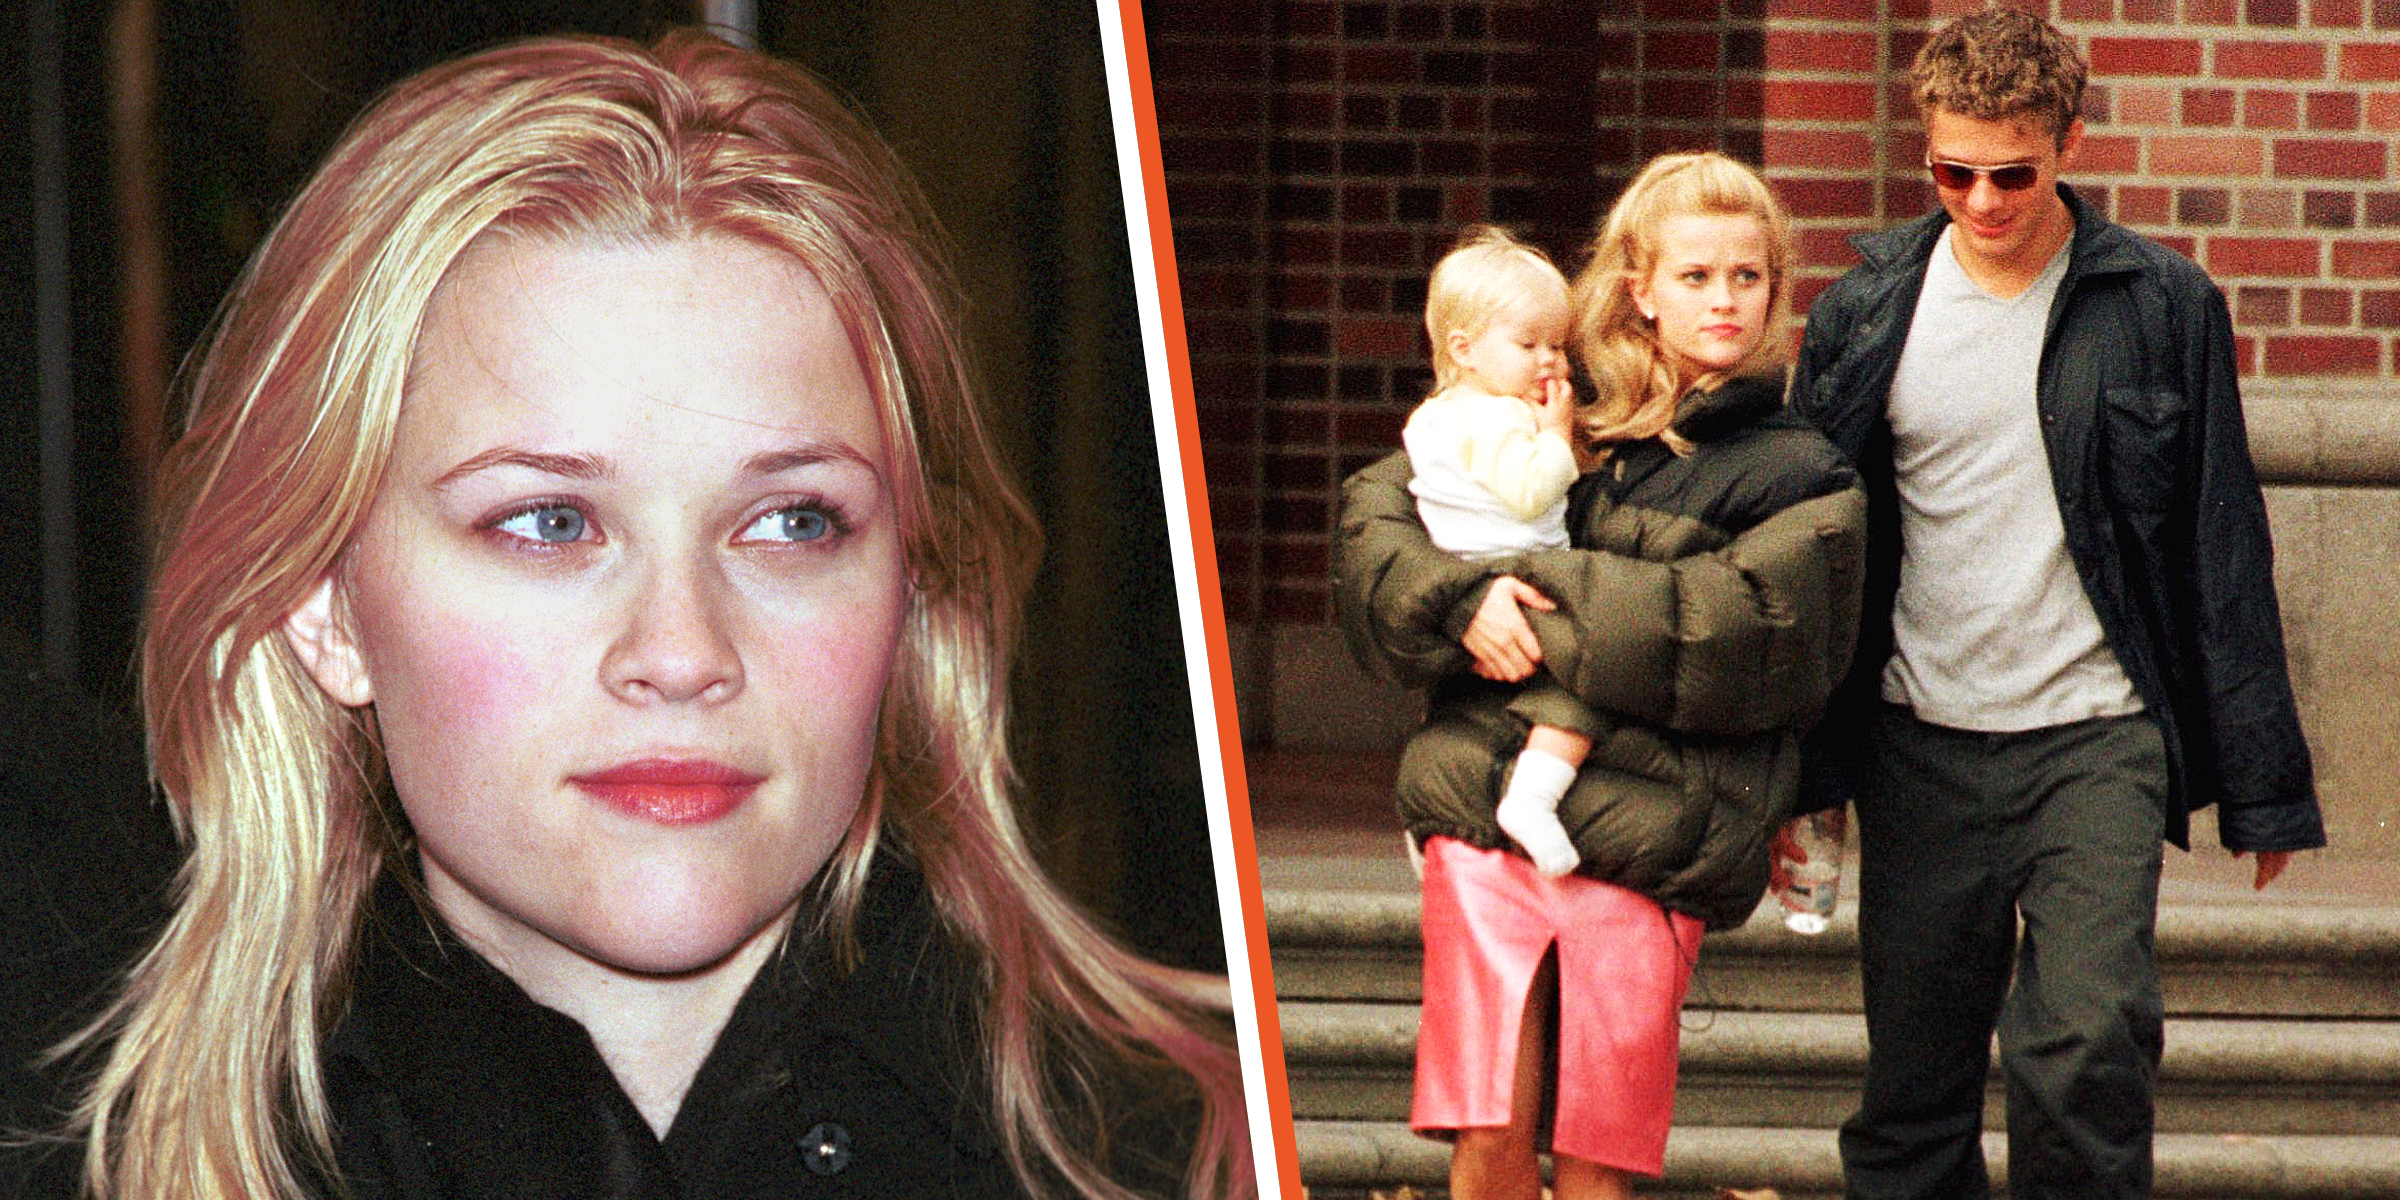 Reese Witherspoon | Reese Witherspoon, Ryan Phillippe And their Child | Source: Getty Images